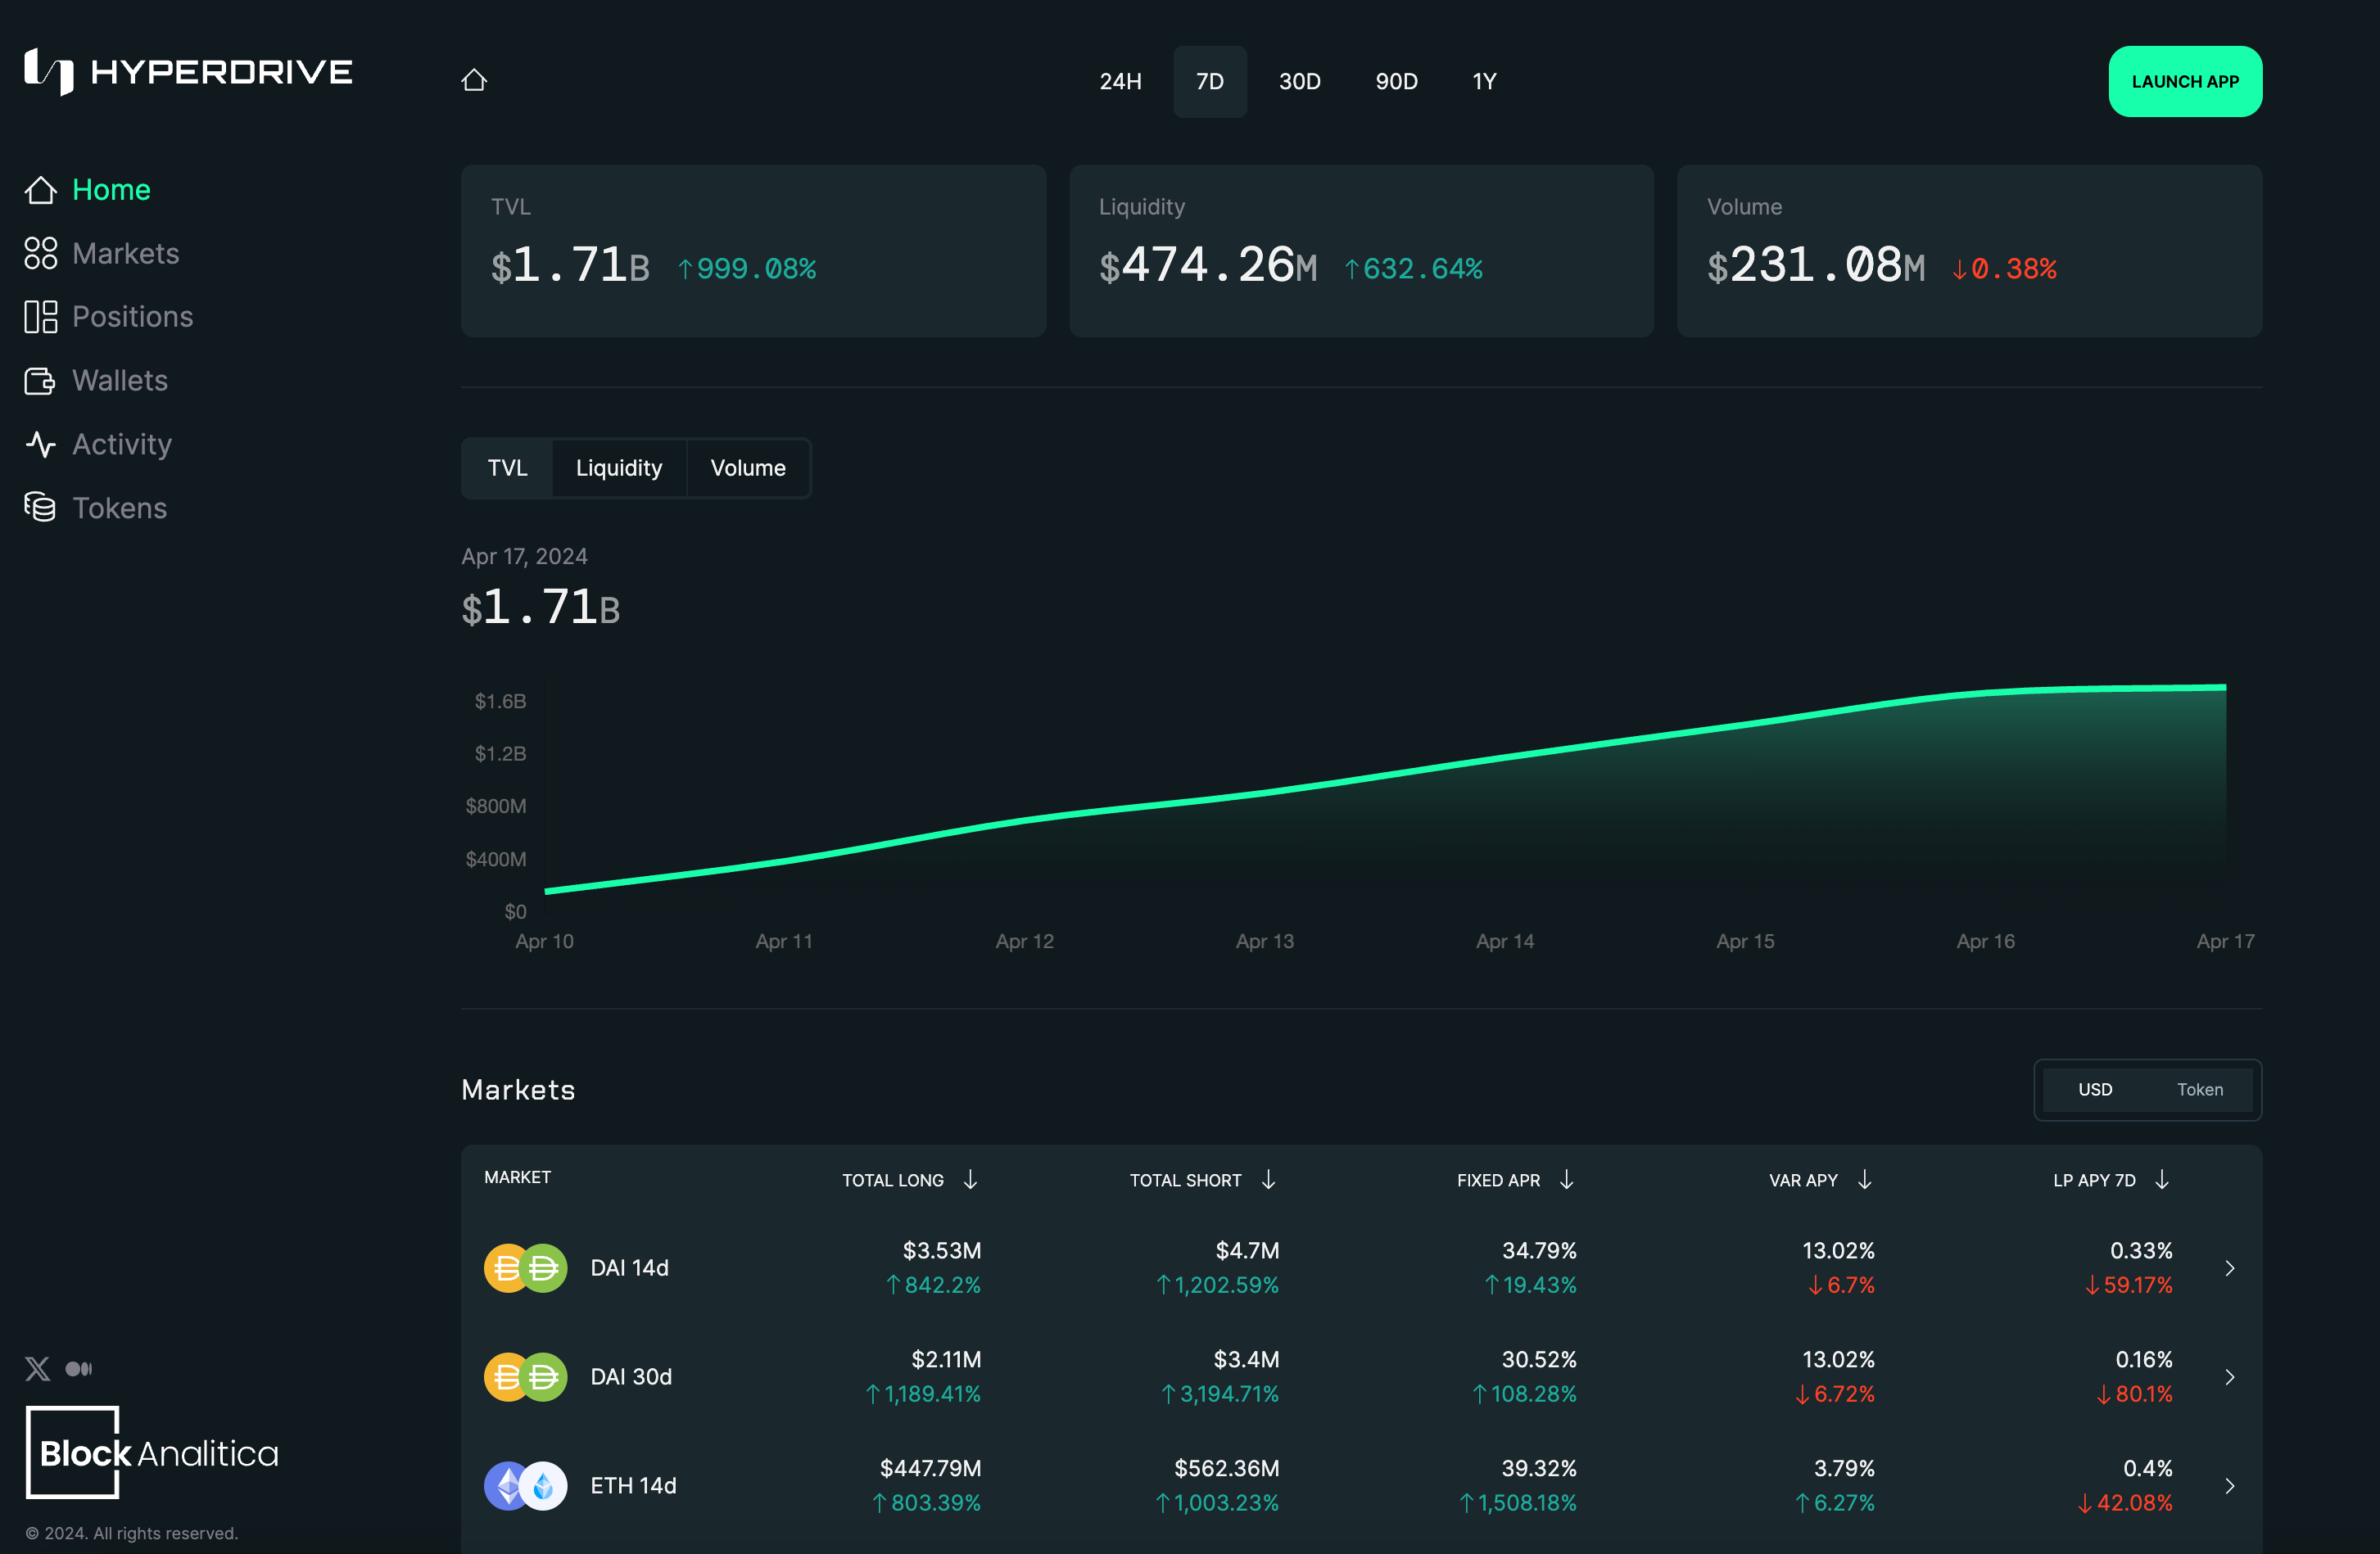 Introducing the Hyperdrive Analytics Dashboard